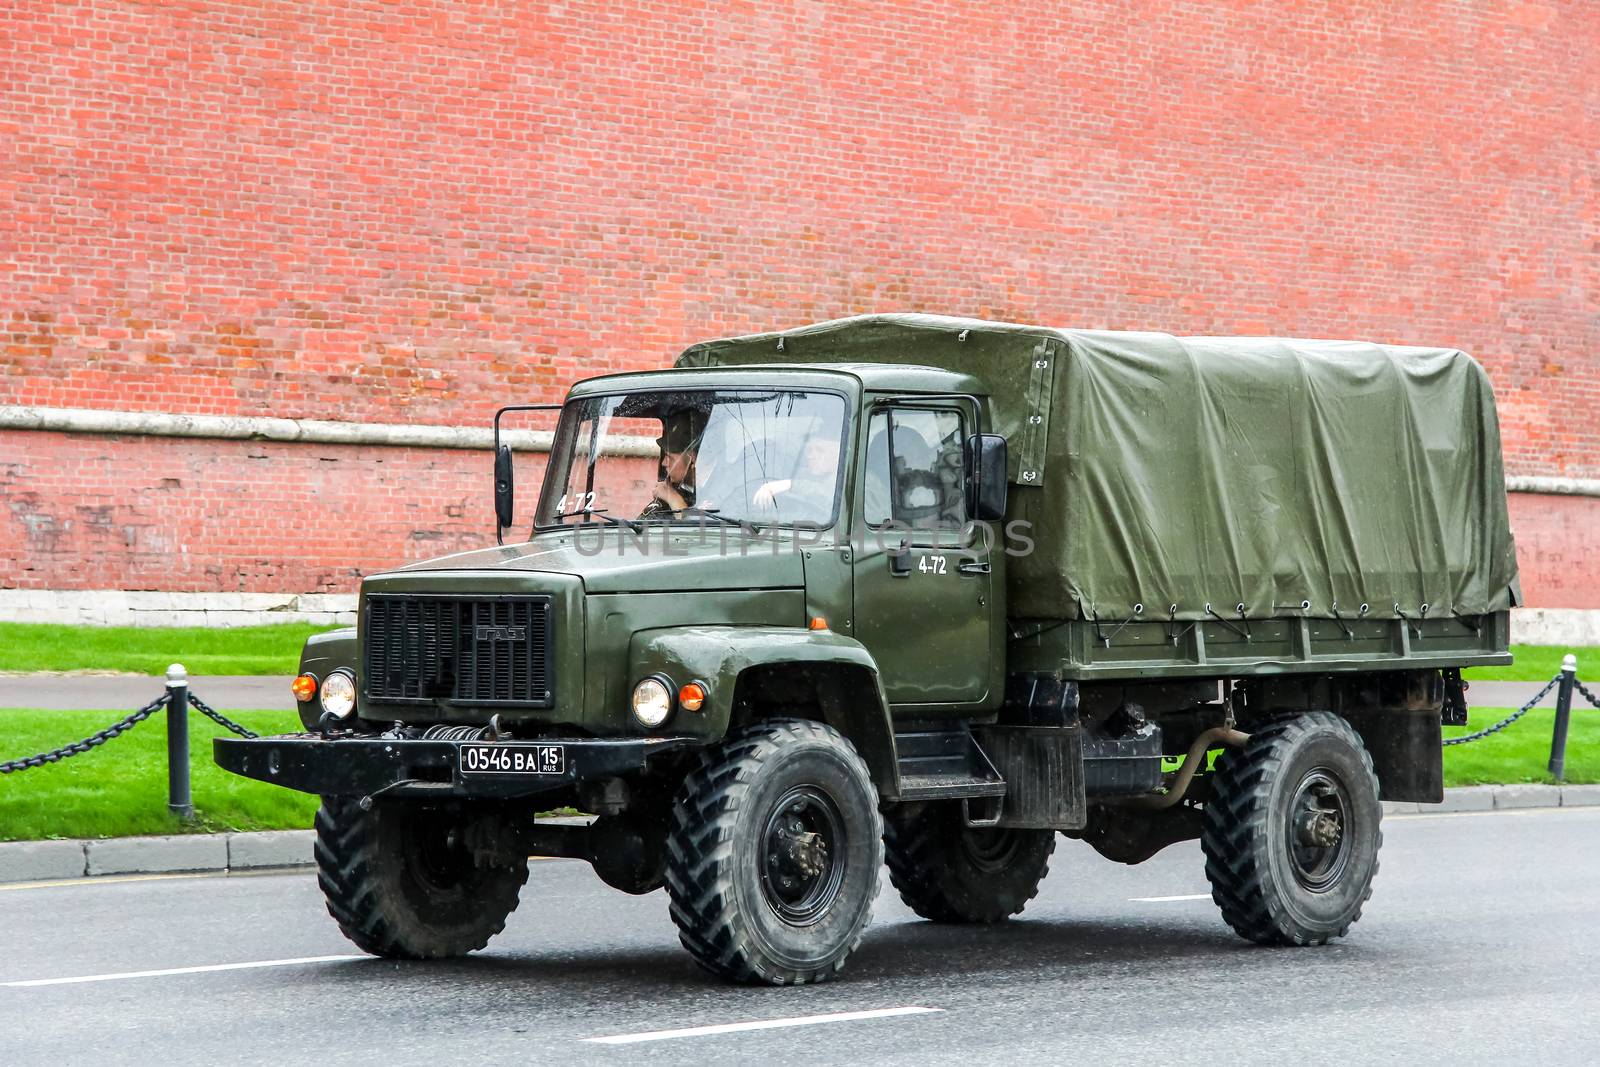 MOSCOW, RUSSIA - MAY 6, 2012: Russian military truck GAZ 3308 in the city street.